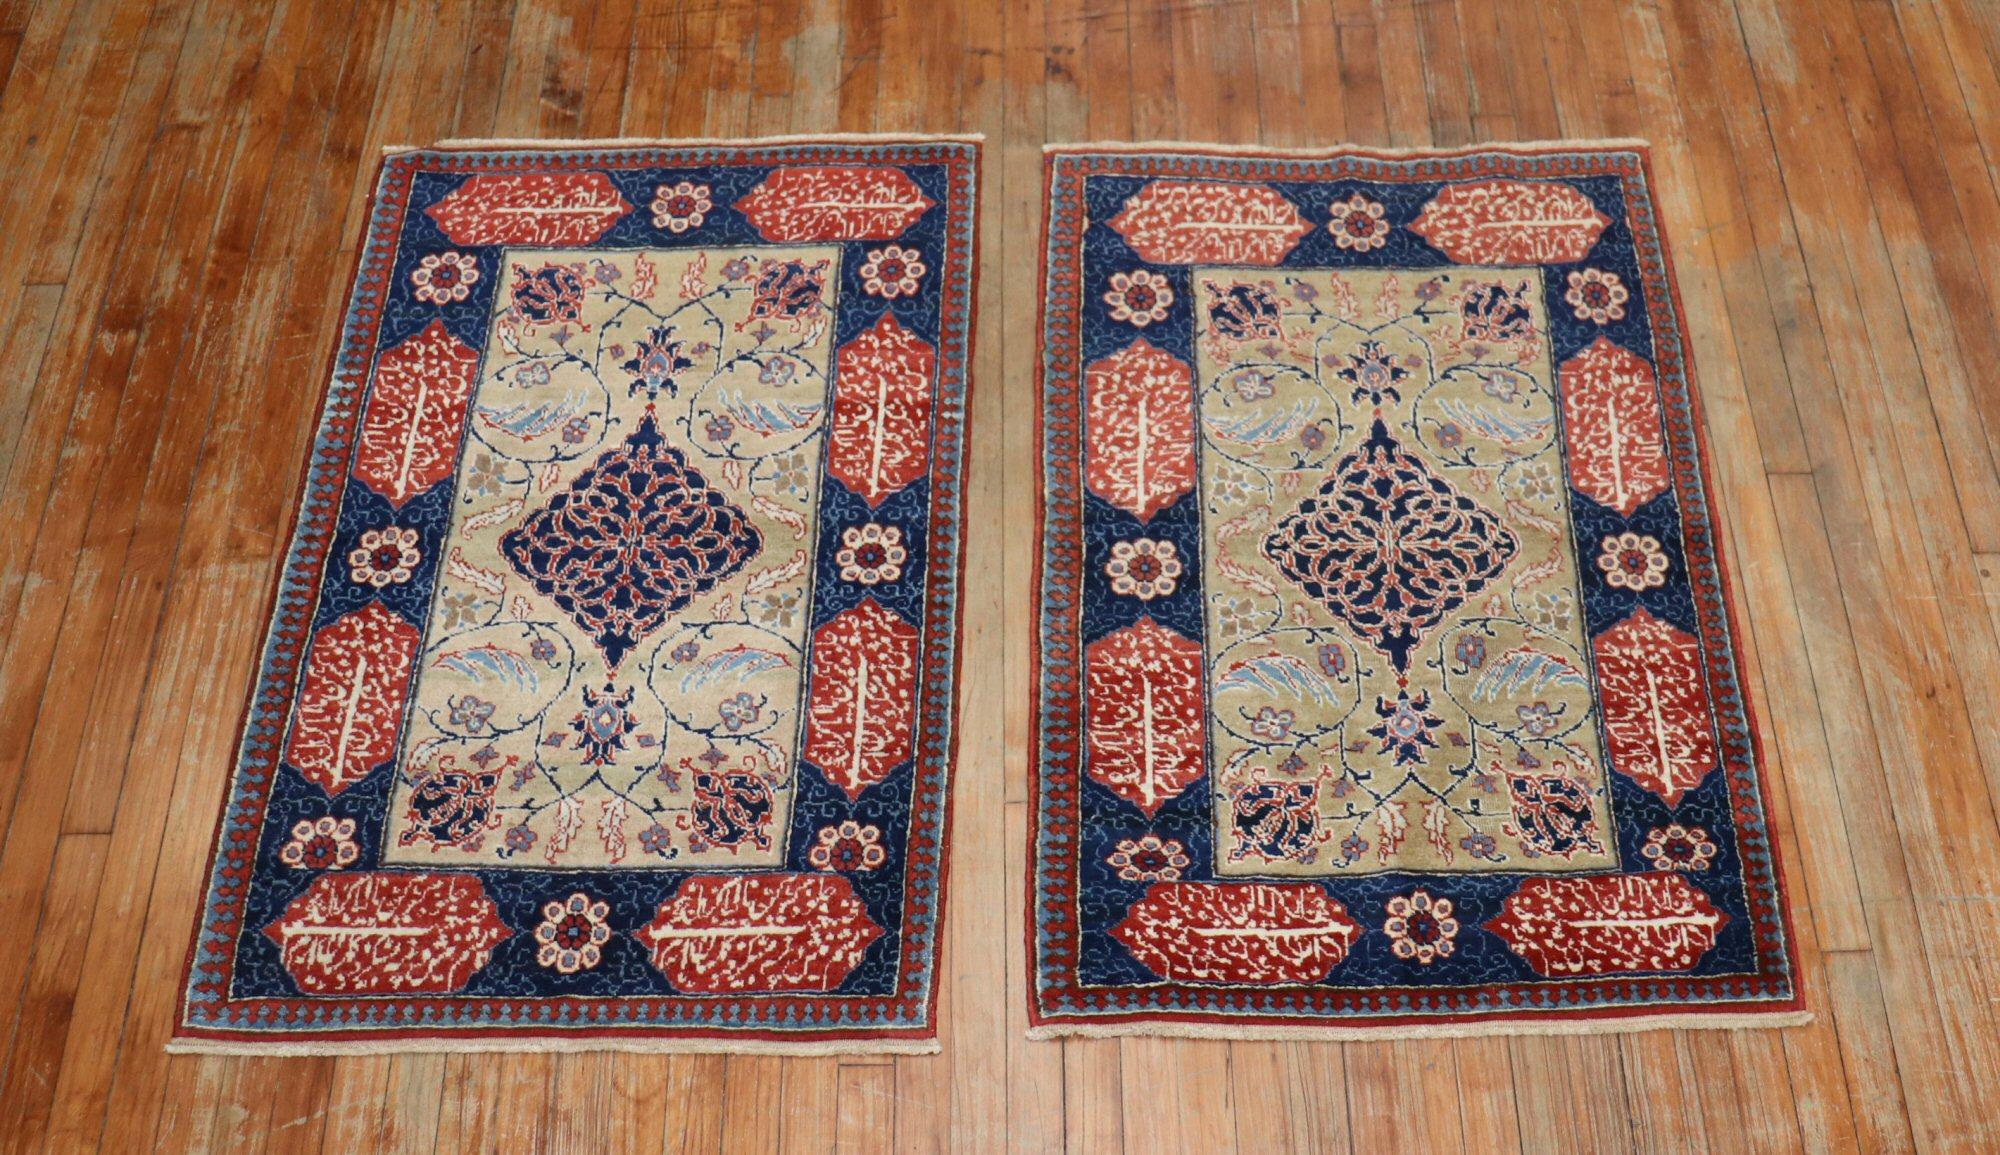 Pair of Persian Tabriz rugs from the 1920s with love poems written in Farsi in both borders

Measures: 2'8” x 4'5” respectively.
  